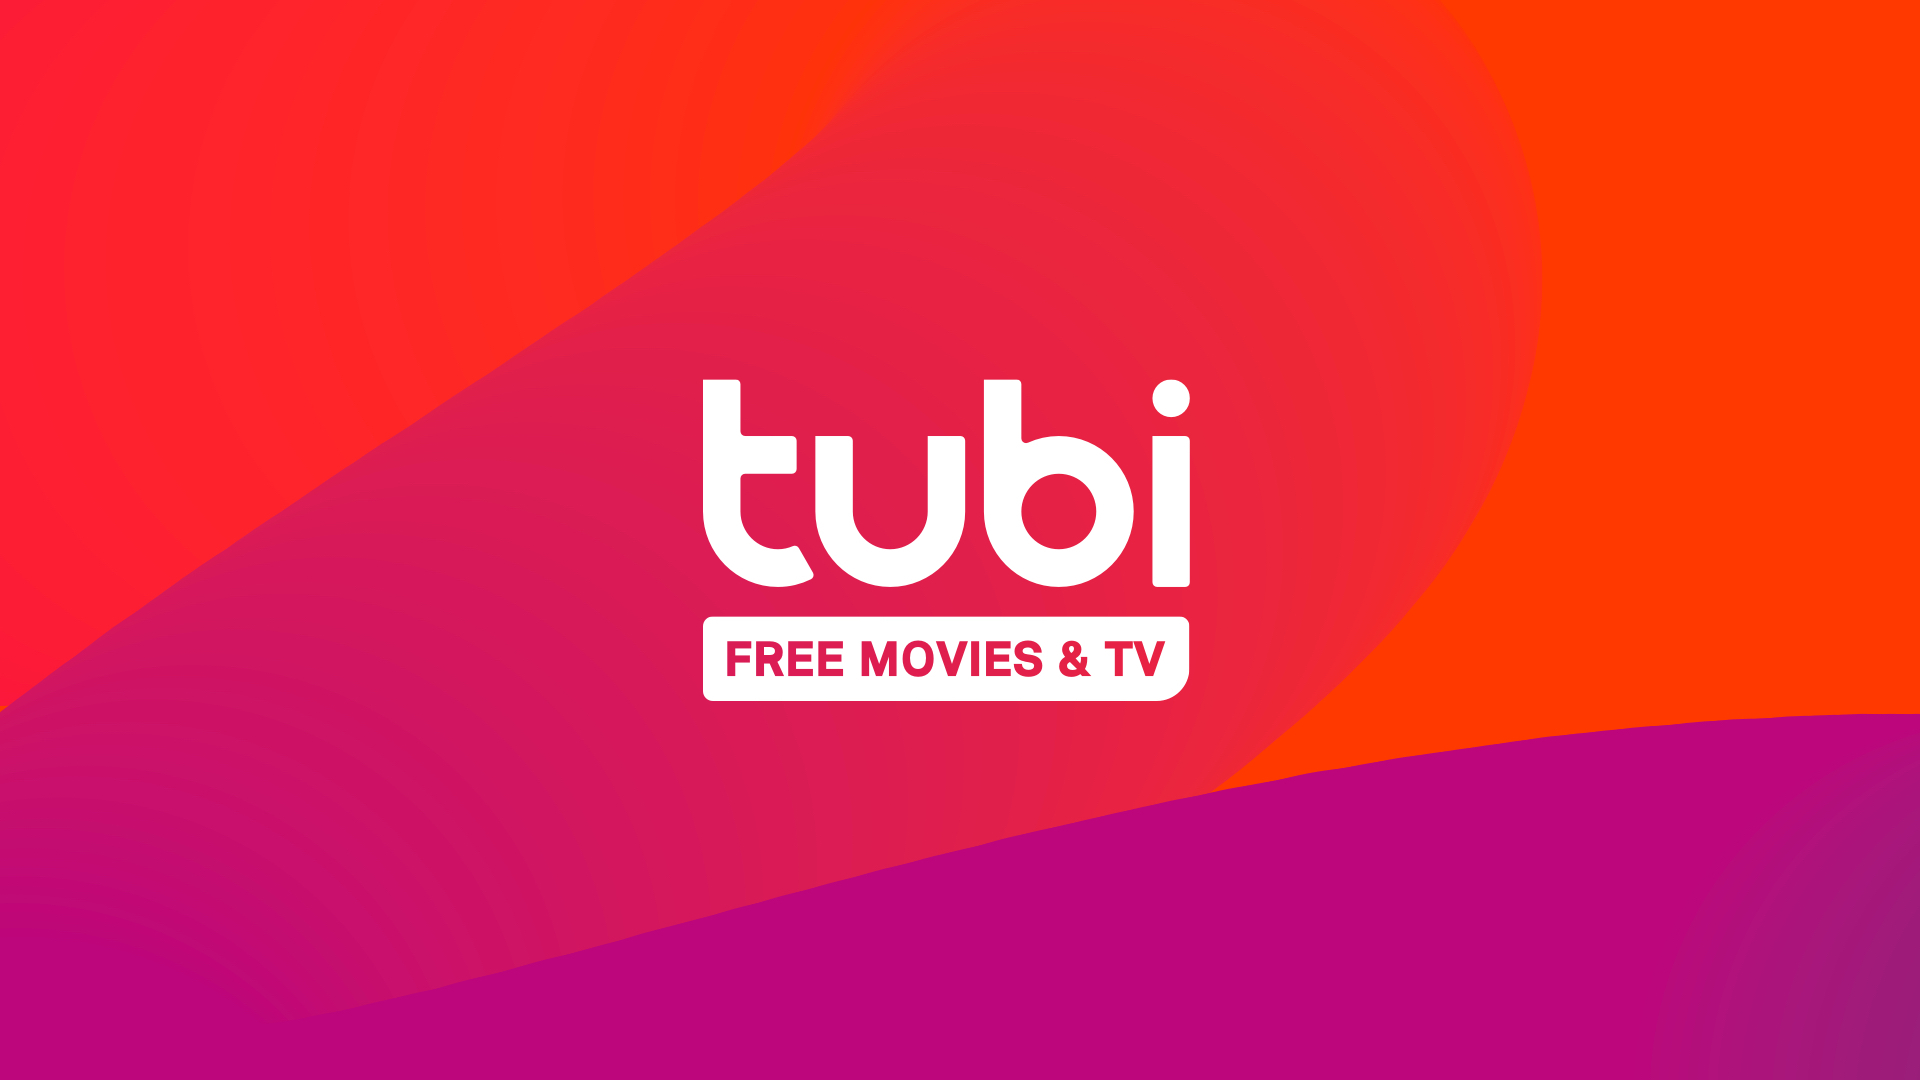 Tubi Report Predicts Free Streaming Audience Will Surpass Paid Streaming by Mid-2022